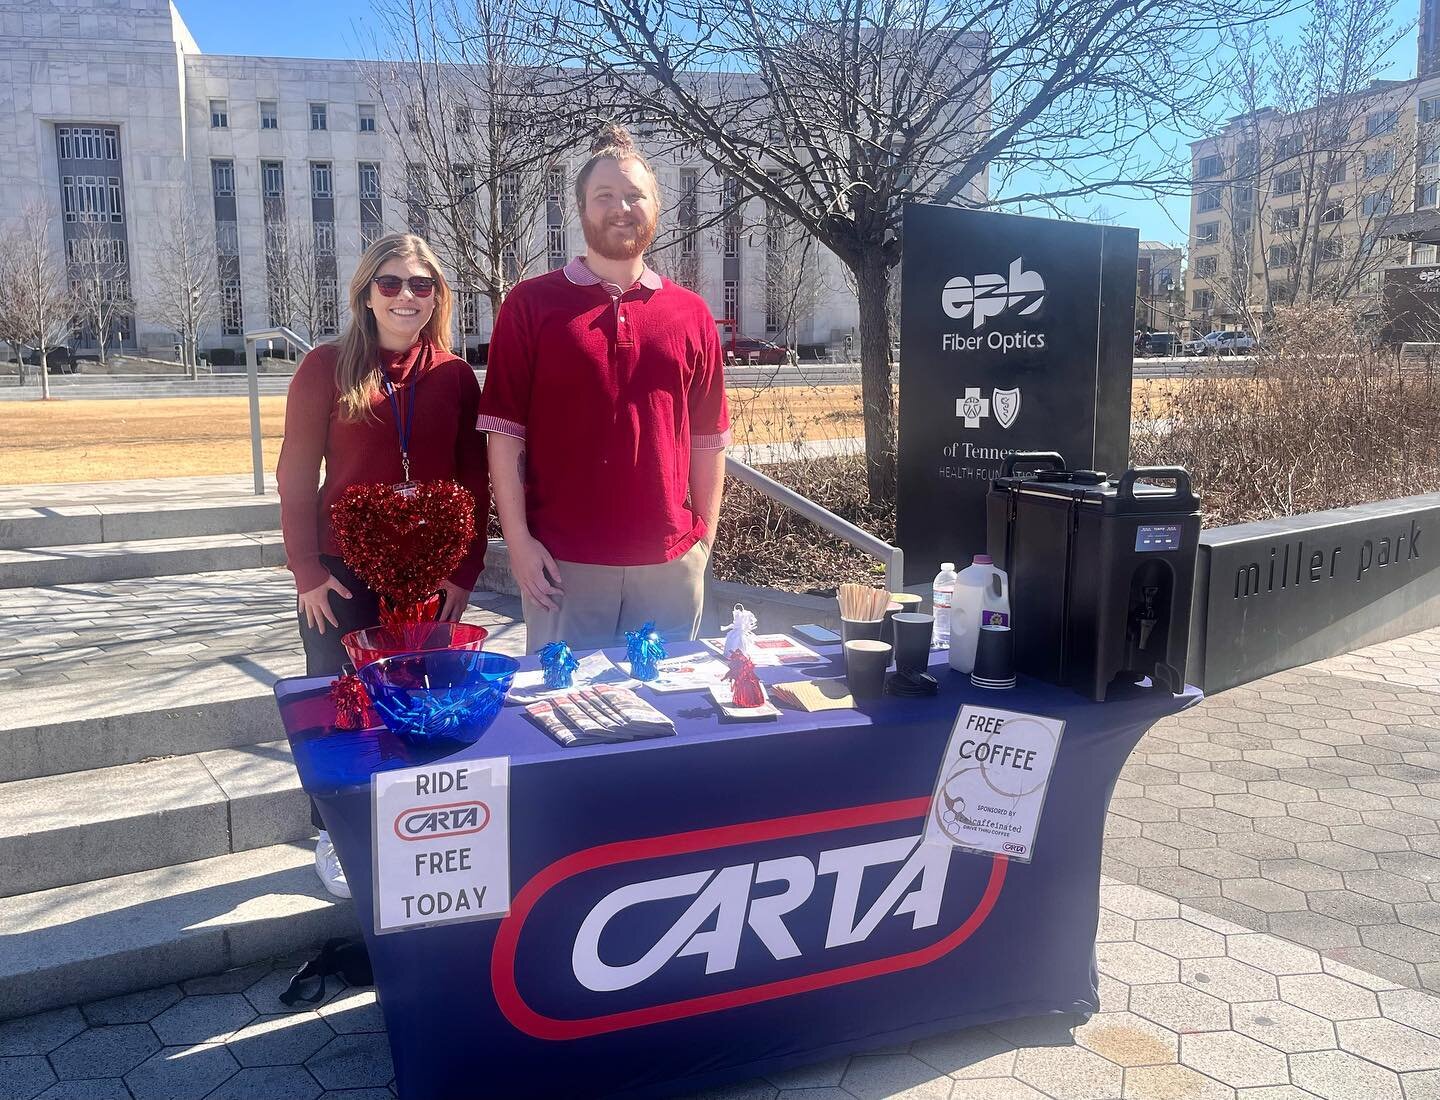 Hurry, hop on CARTA &mdash;- it&rsquo;s FREE today! @gocartacha fixed route and Care-a-van services are free all day today, so tell your friends. If you make it to @millerparkcha while they are set up you can even snag a free cup of coffee from @be_c